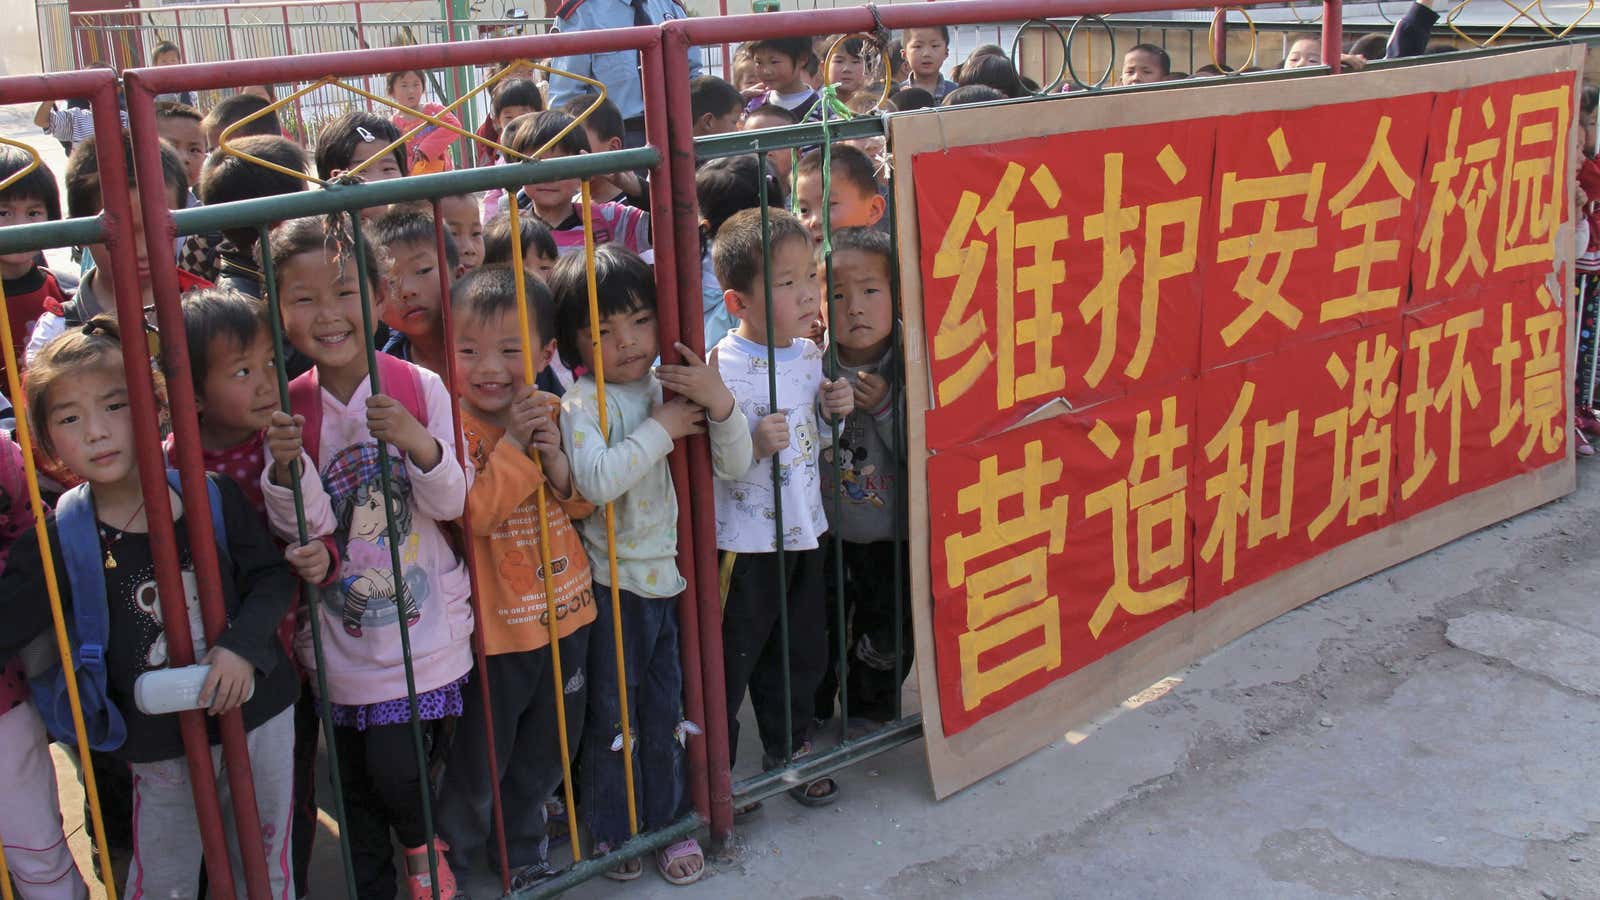 Children wait behind fence for their parents after school at a kindergarten in Tangying County, Henan province May 13, 2010. A spate of school killings…